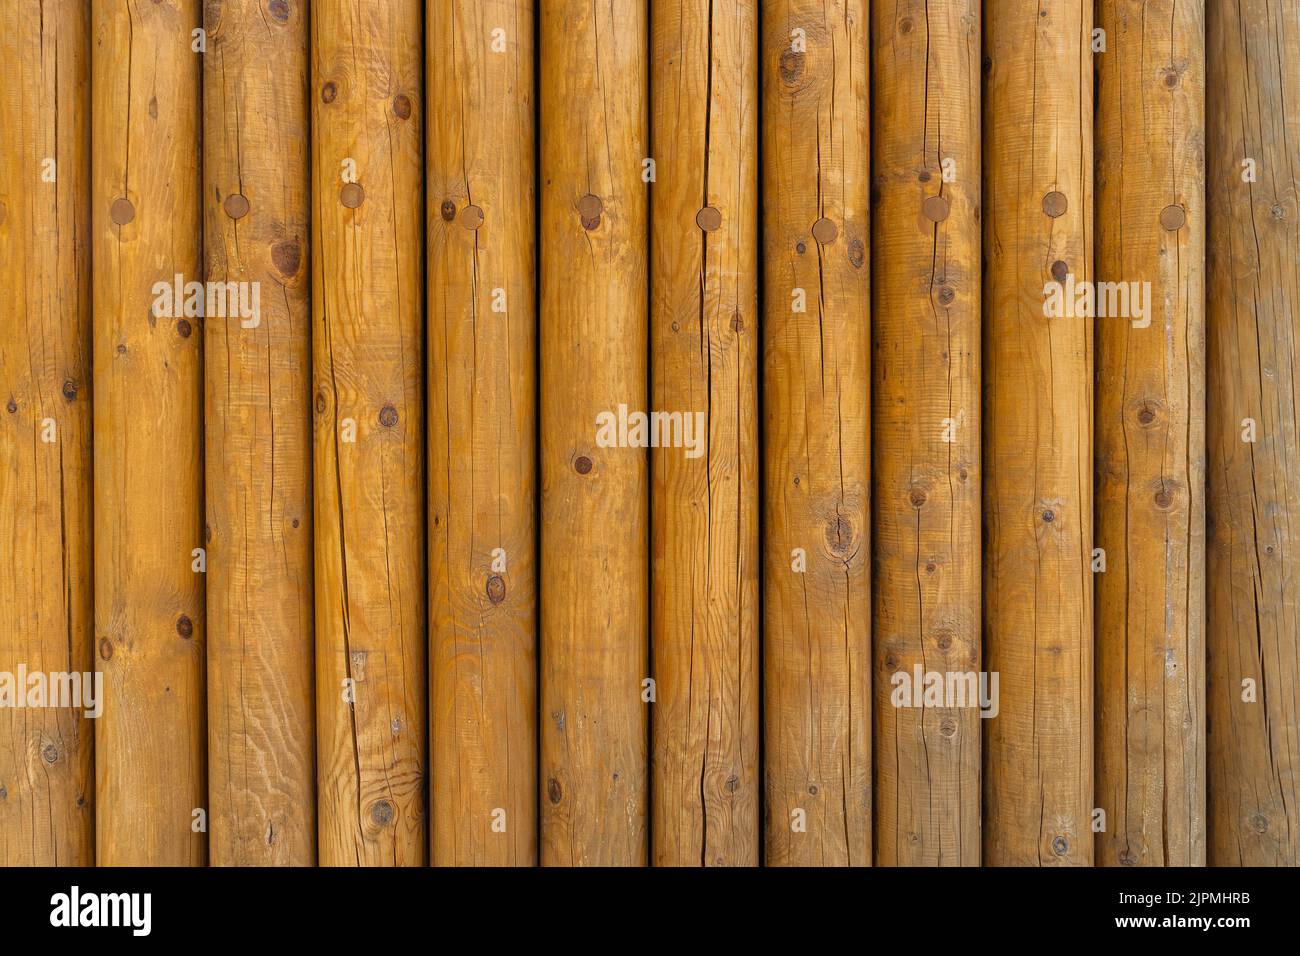 Texture or wall made of cylindrical wooden beams. Stock Photo